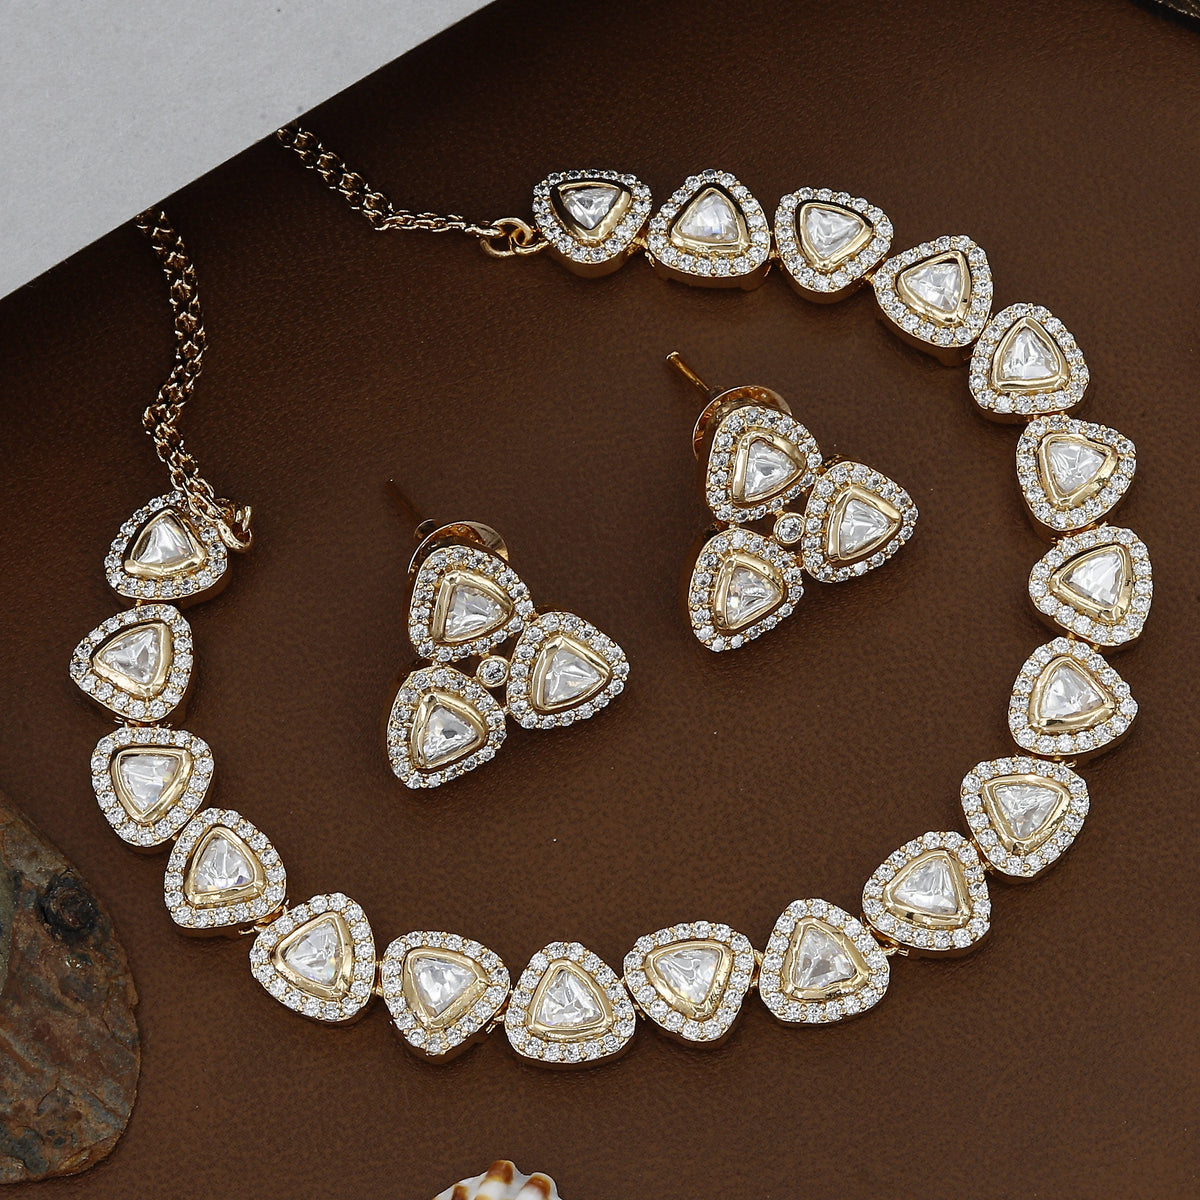 Antique Triangle Necklace Set With Earrings